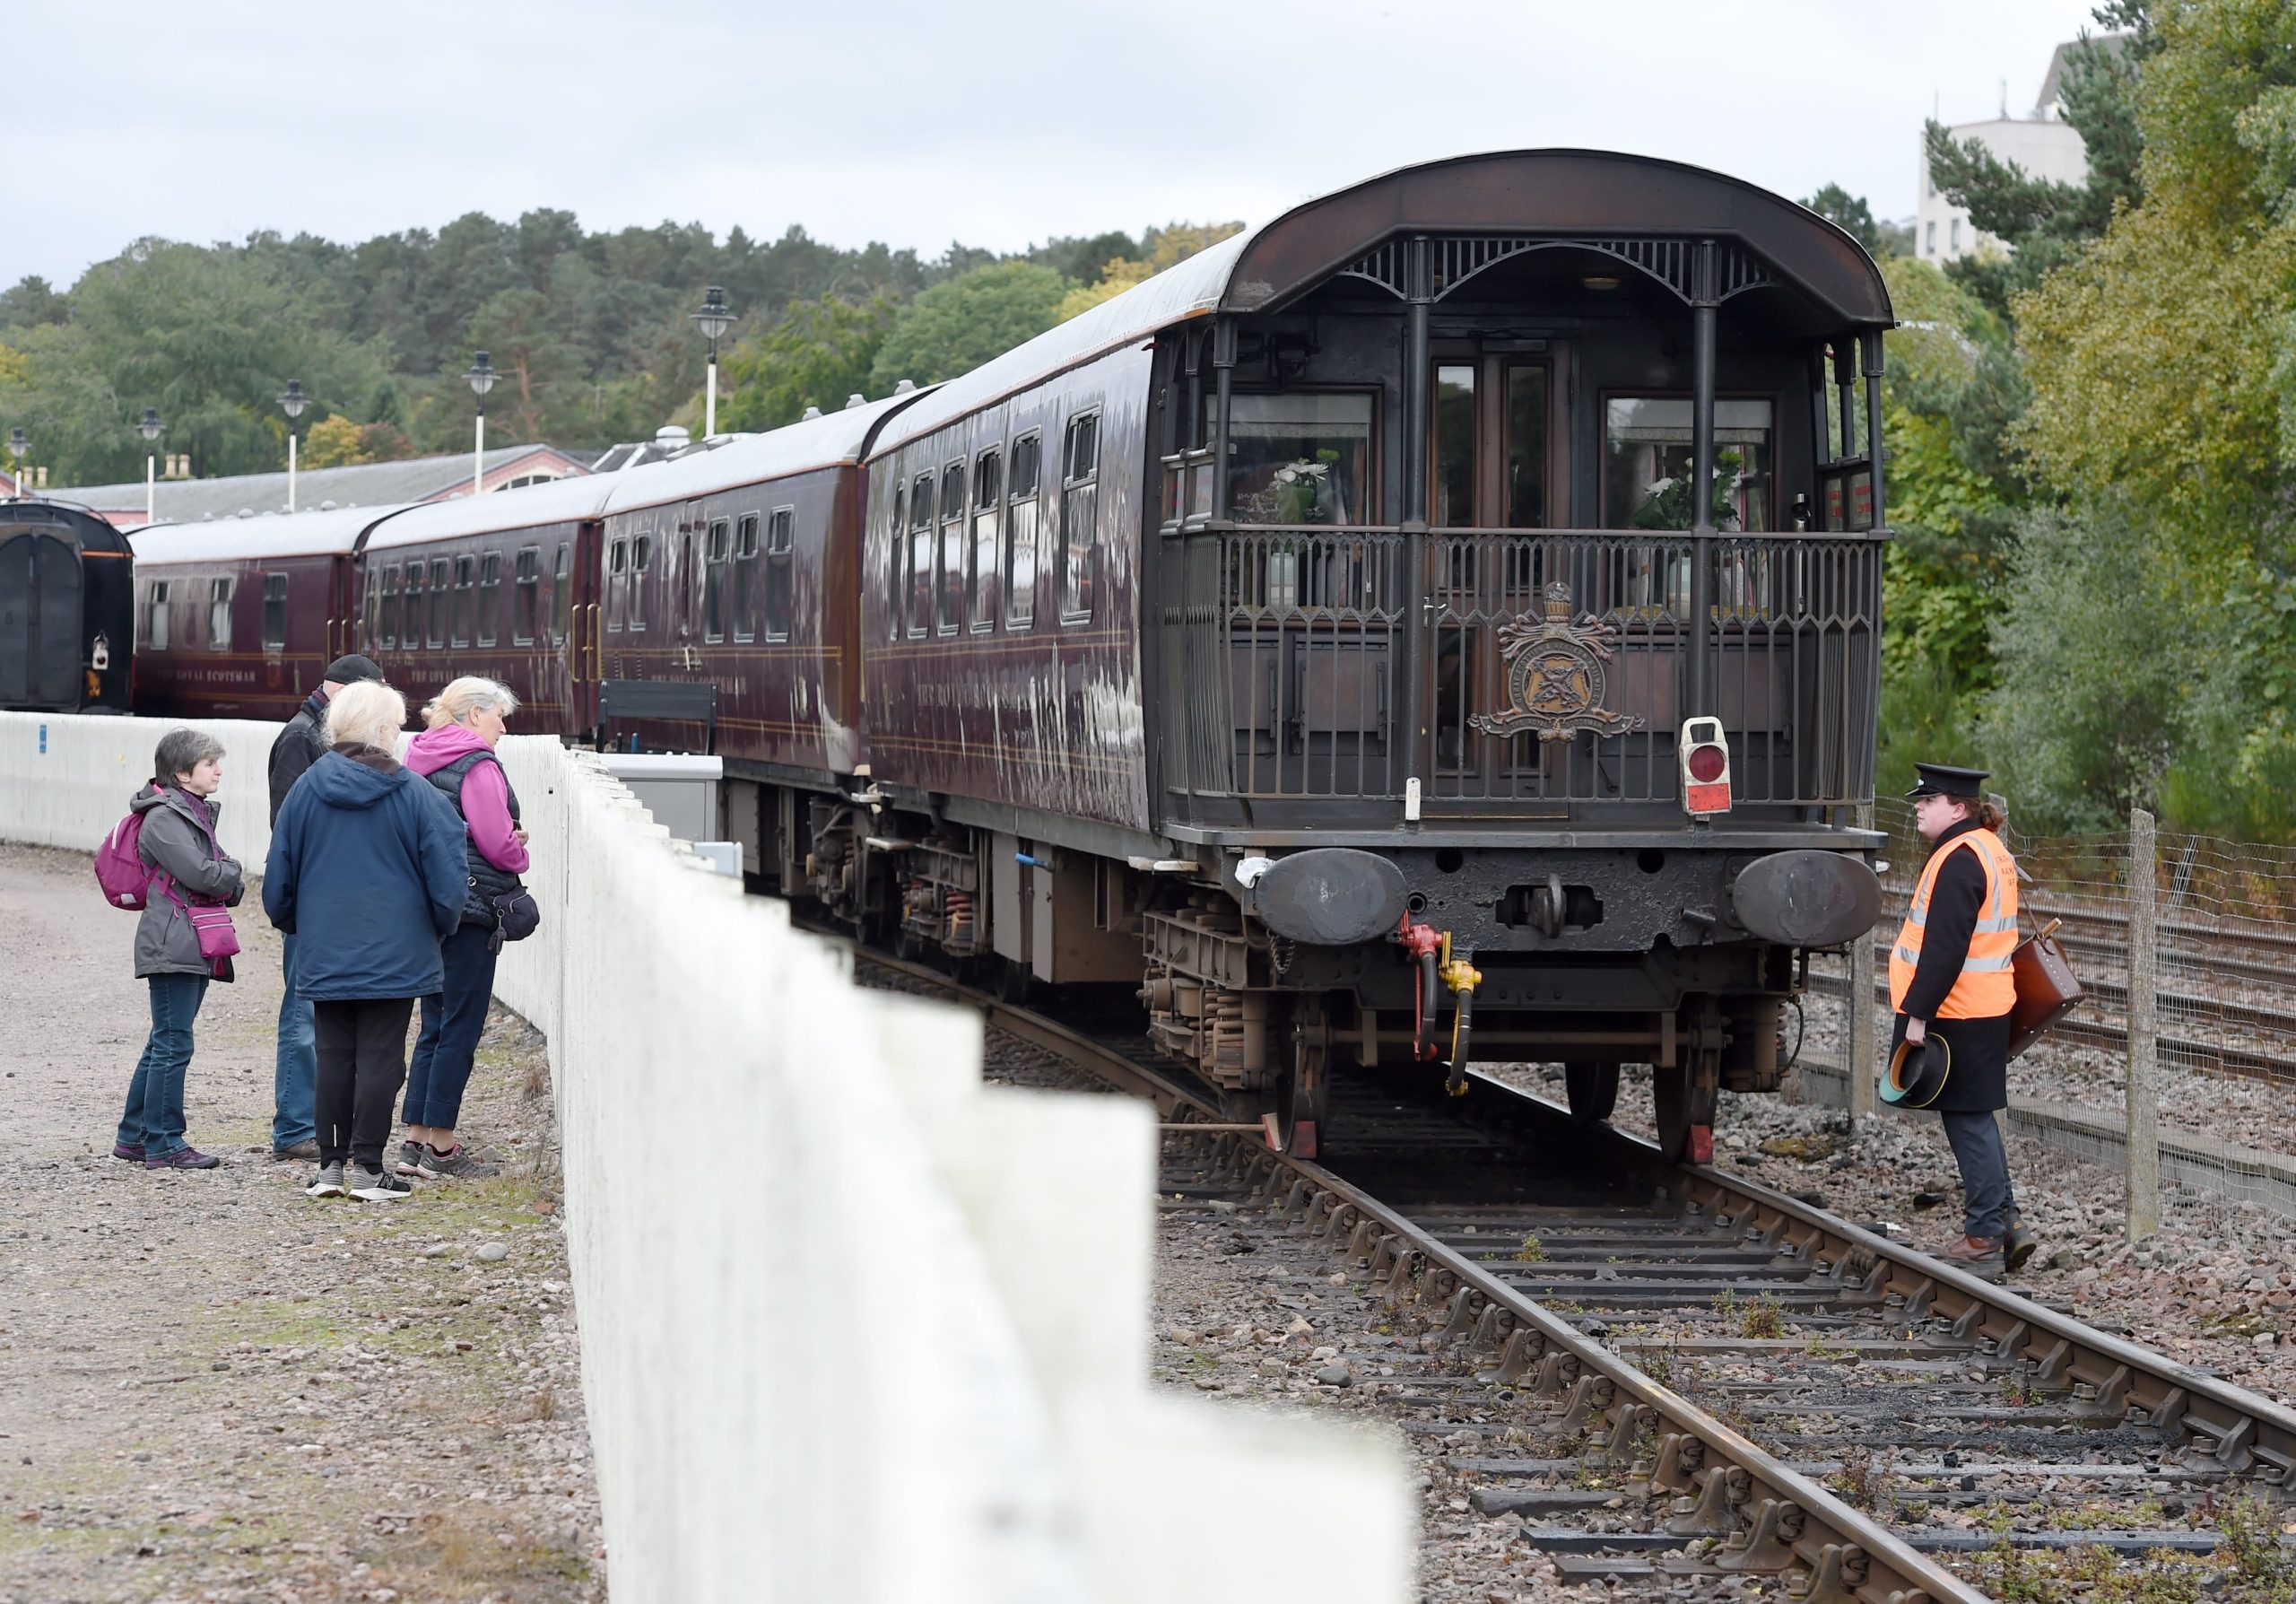 The carriages remain on the track on Saturday morning.